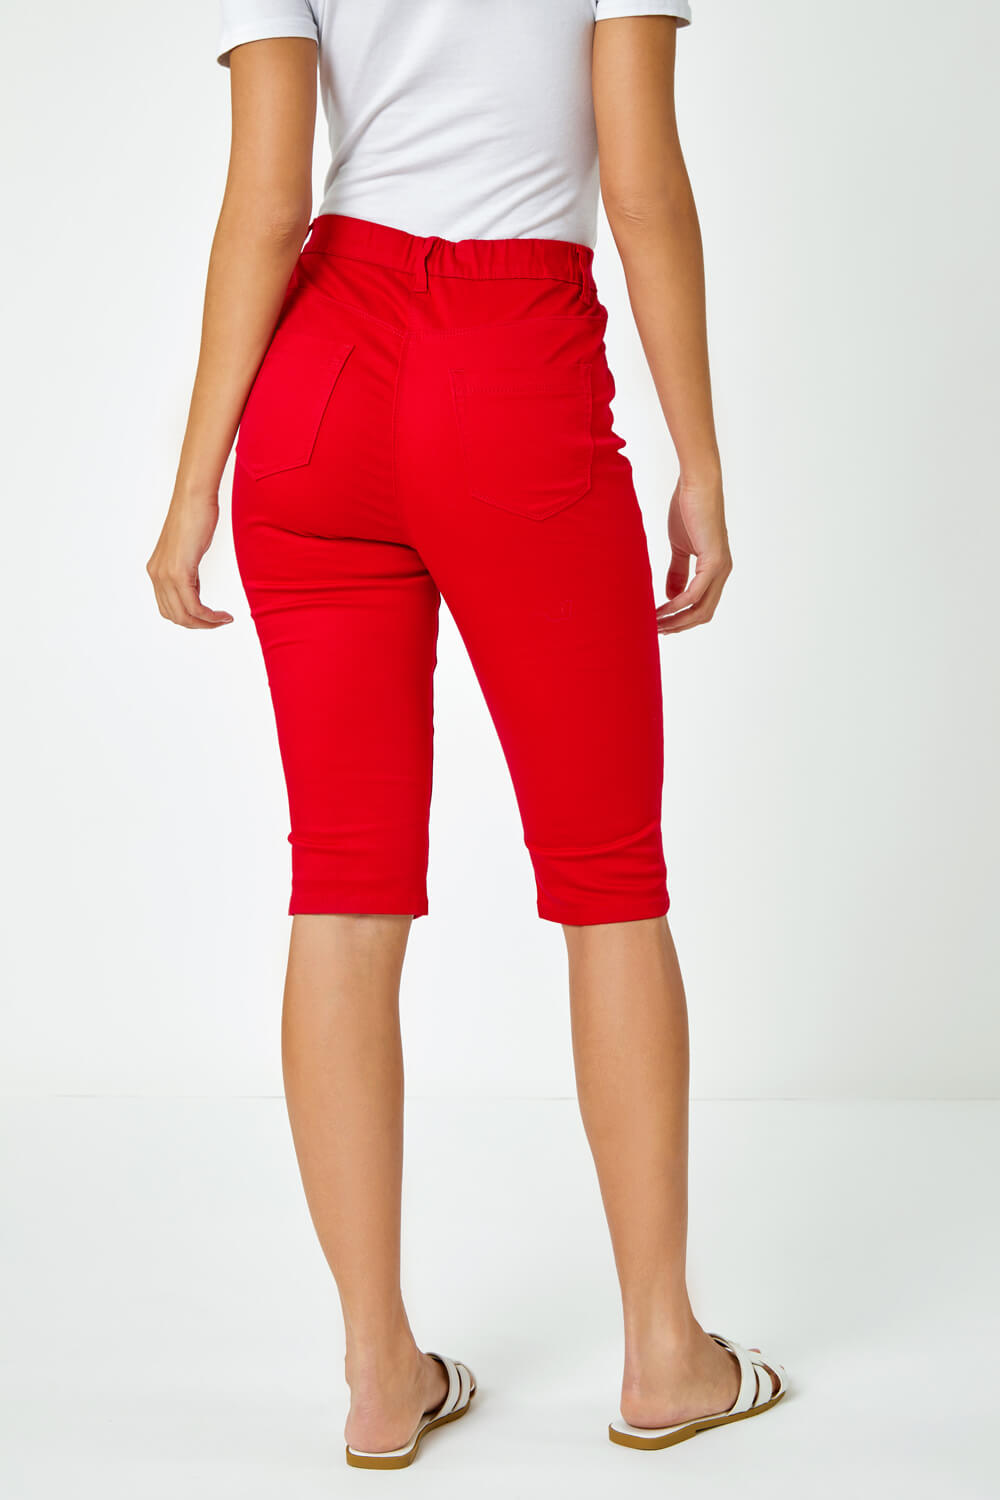 Red Denim Stretch Knee Length Pedal Pusher, Image 4 of 5